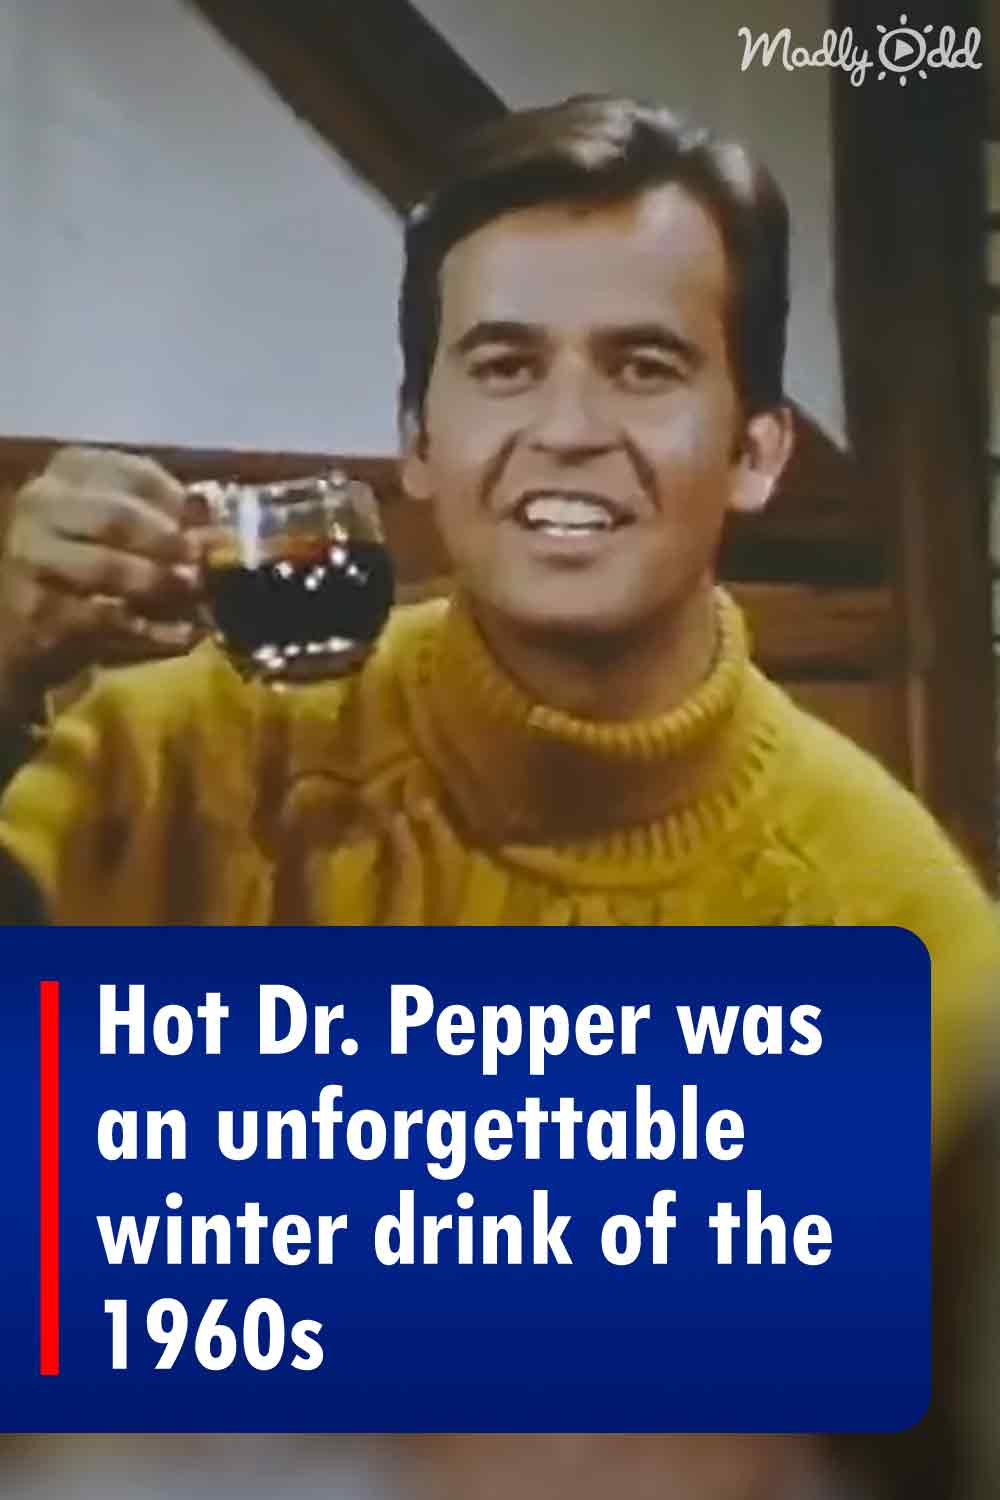 Hot Dr. Pepper was an unforgettable winter drink of the 1960s